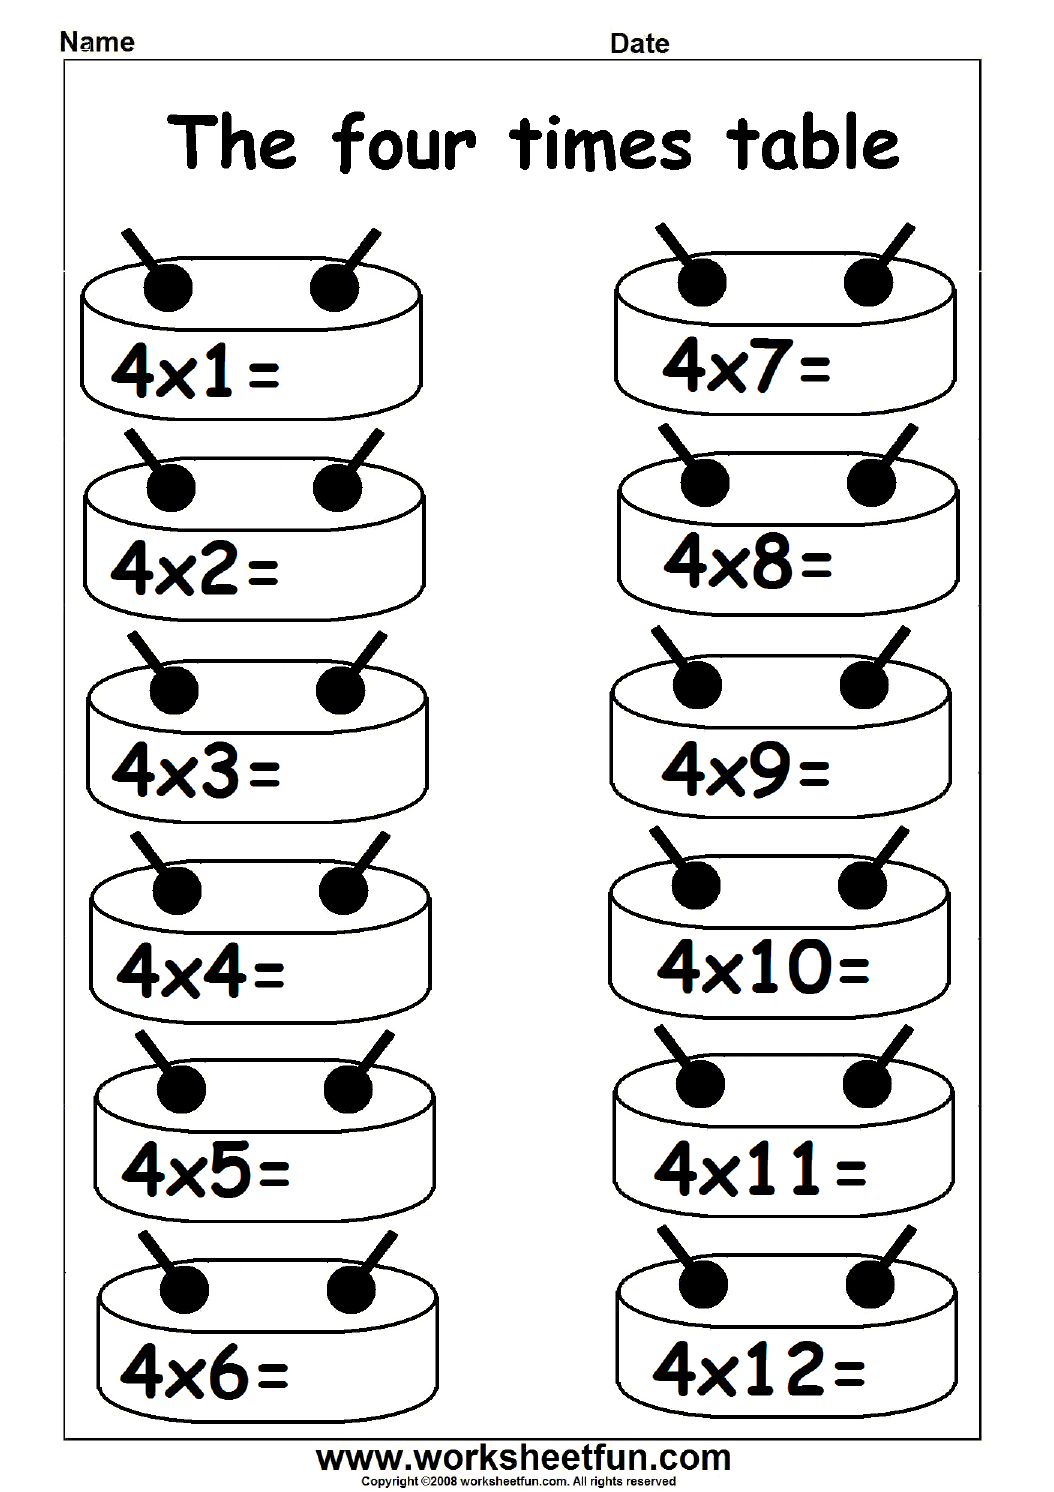  Multiplication Times Tables Worksheets 2 3 4 6 7 8 9 12 13 14 And 16 Times Tables 